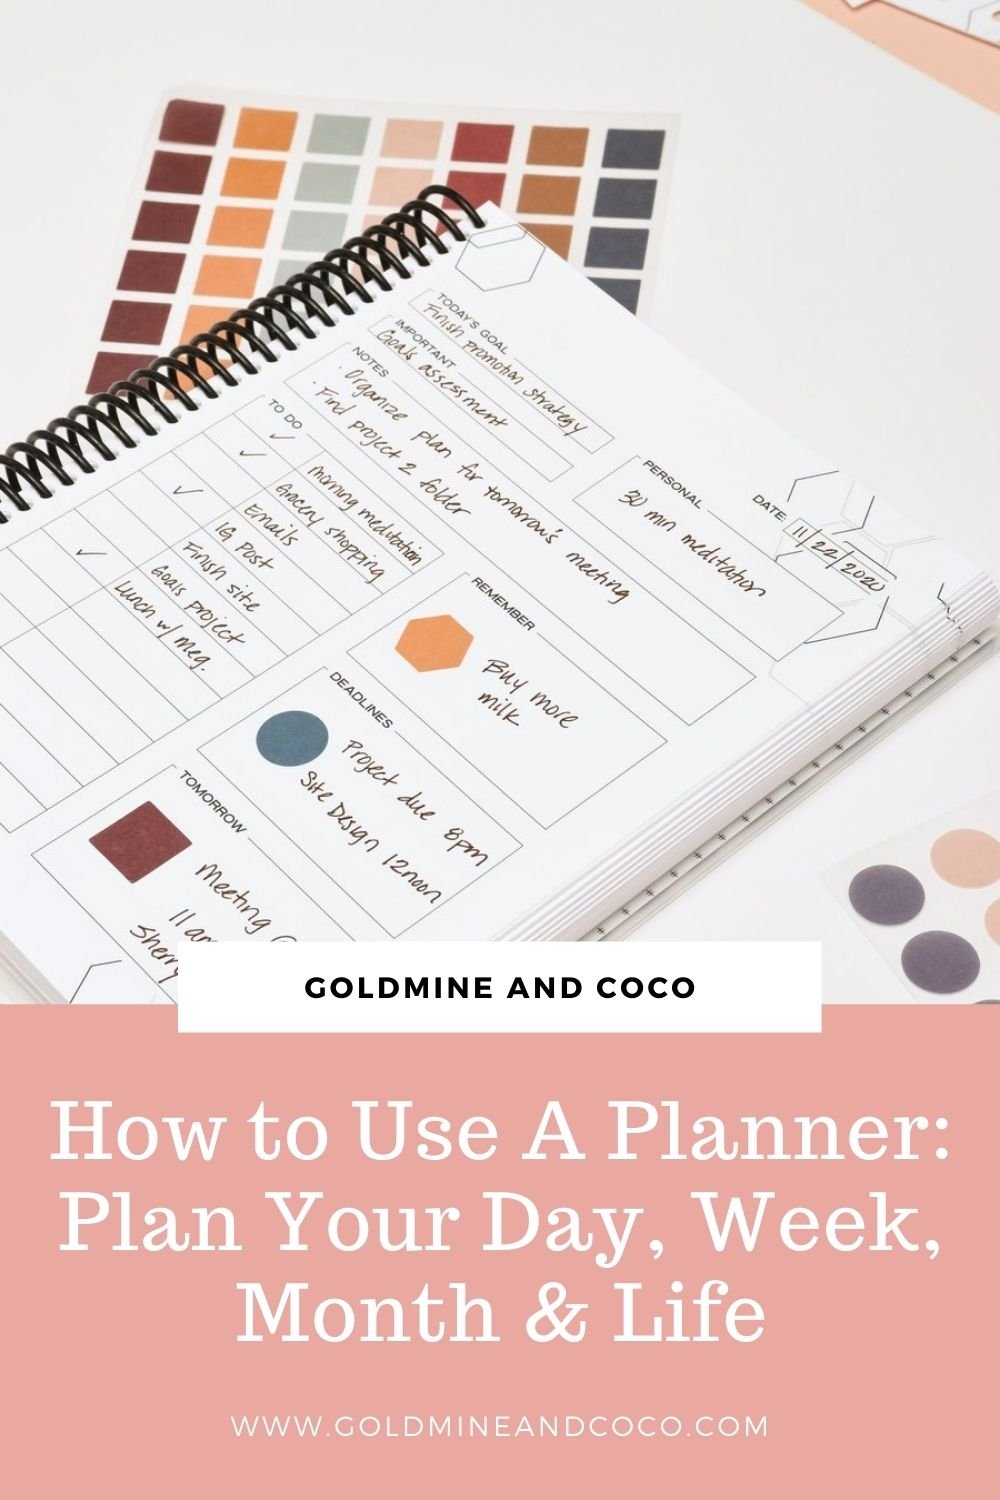 Have To Plan - Daily: Life is Better with a Plan